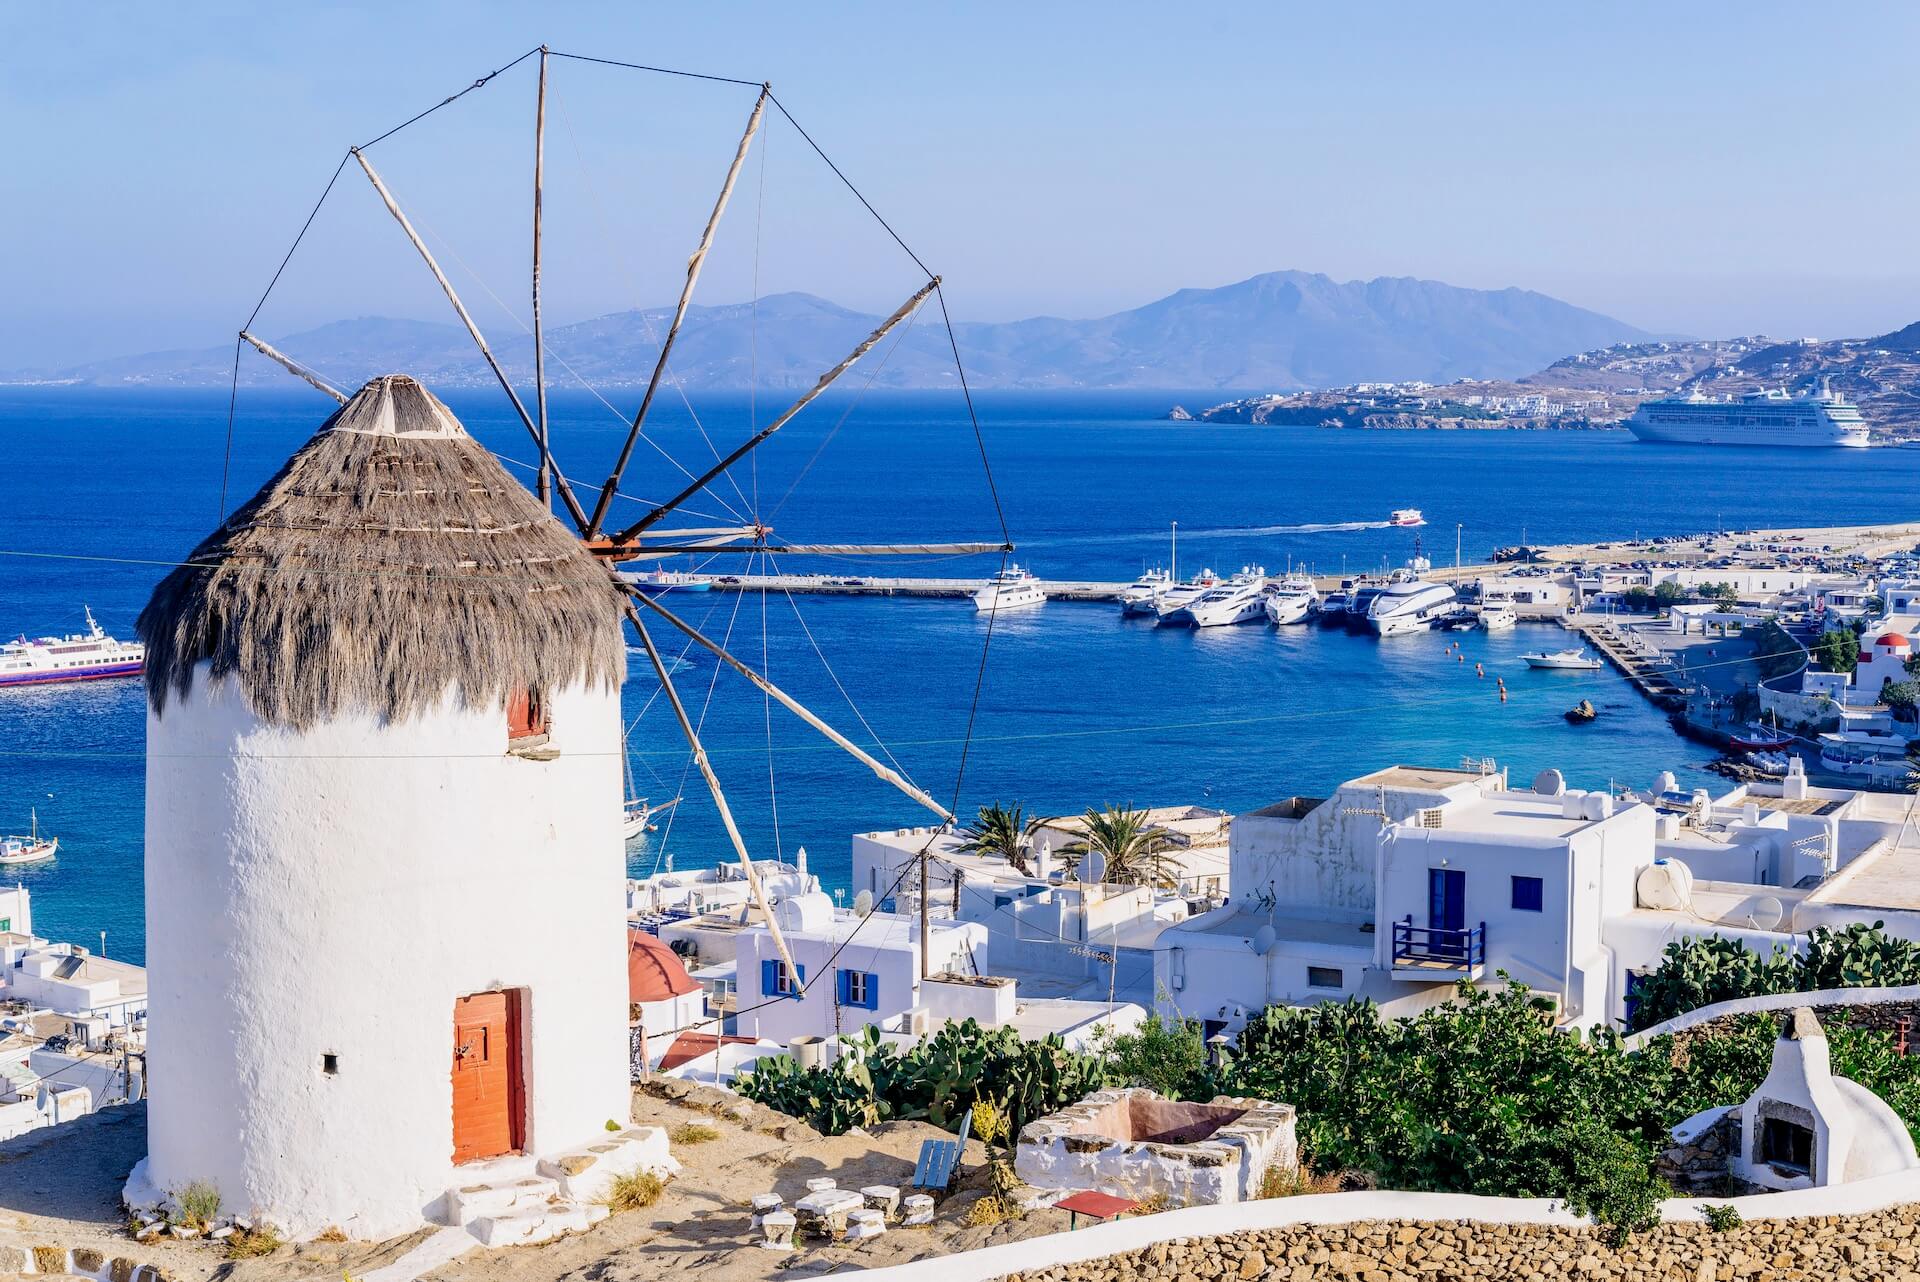 The windmill in Mykonos town, and port and ferries in the distance